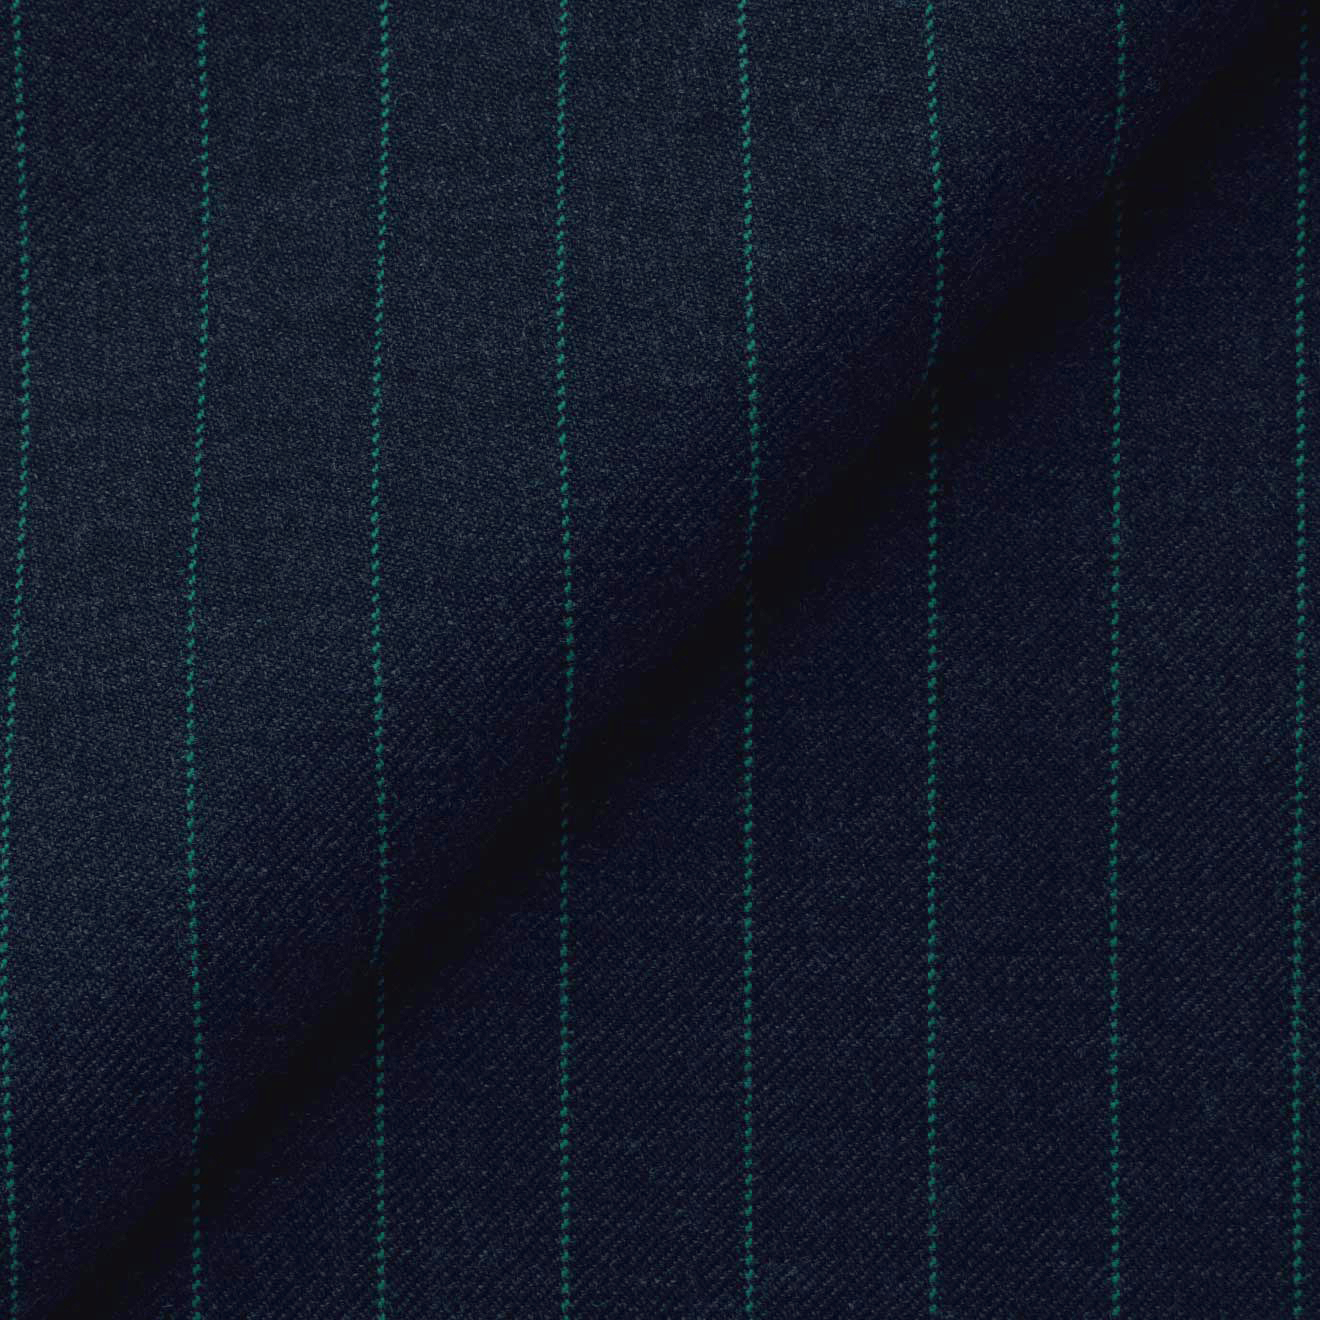 【MEN / 秋冬】TRADITIONAL　WORSTED 21マイクロン NAVY